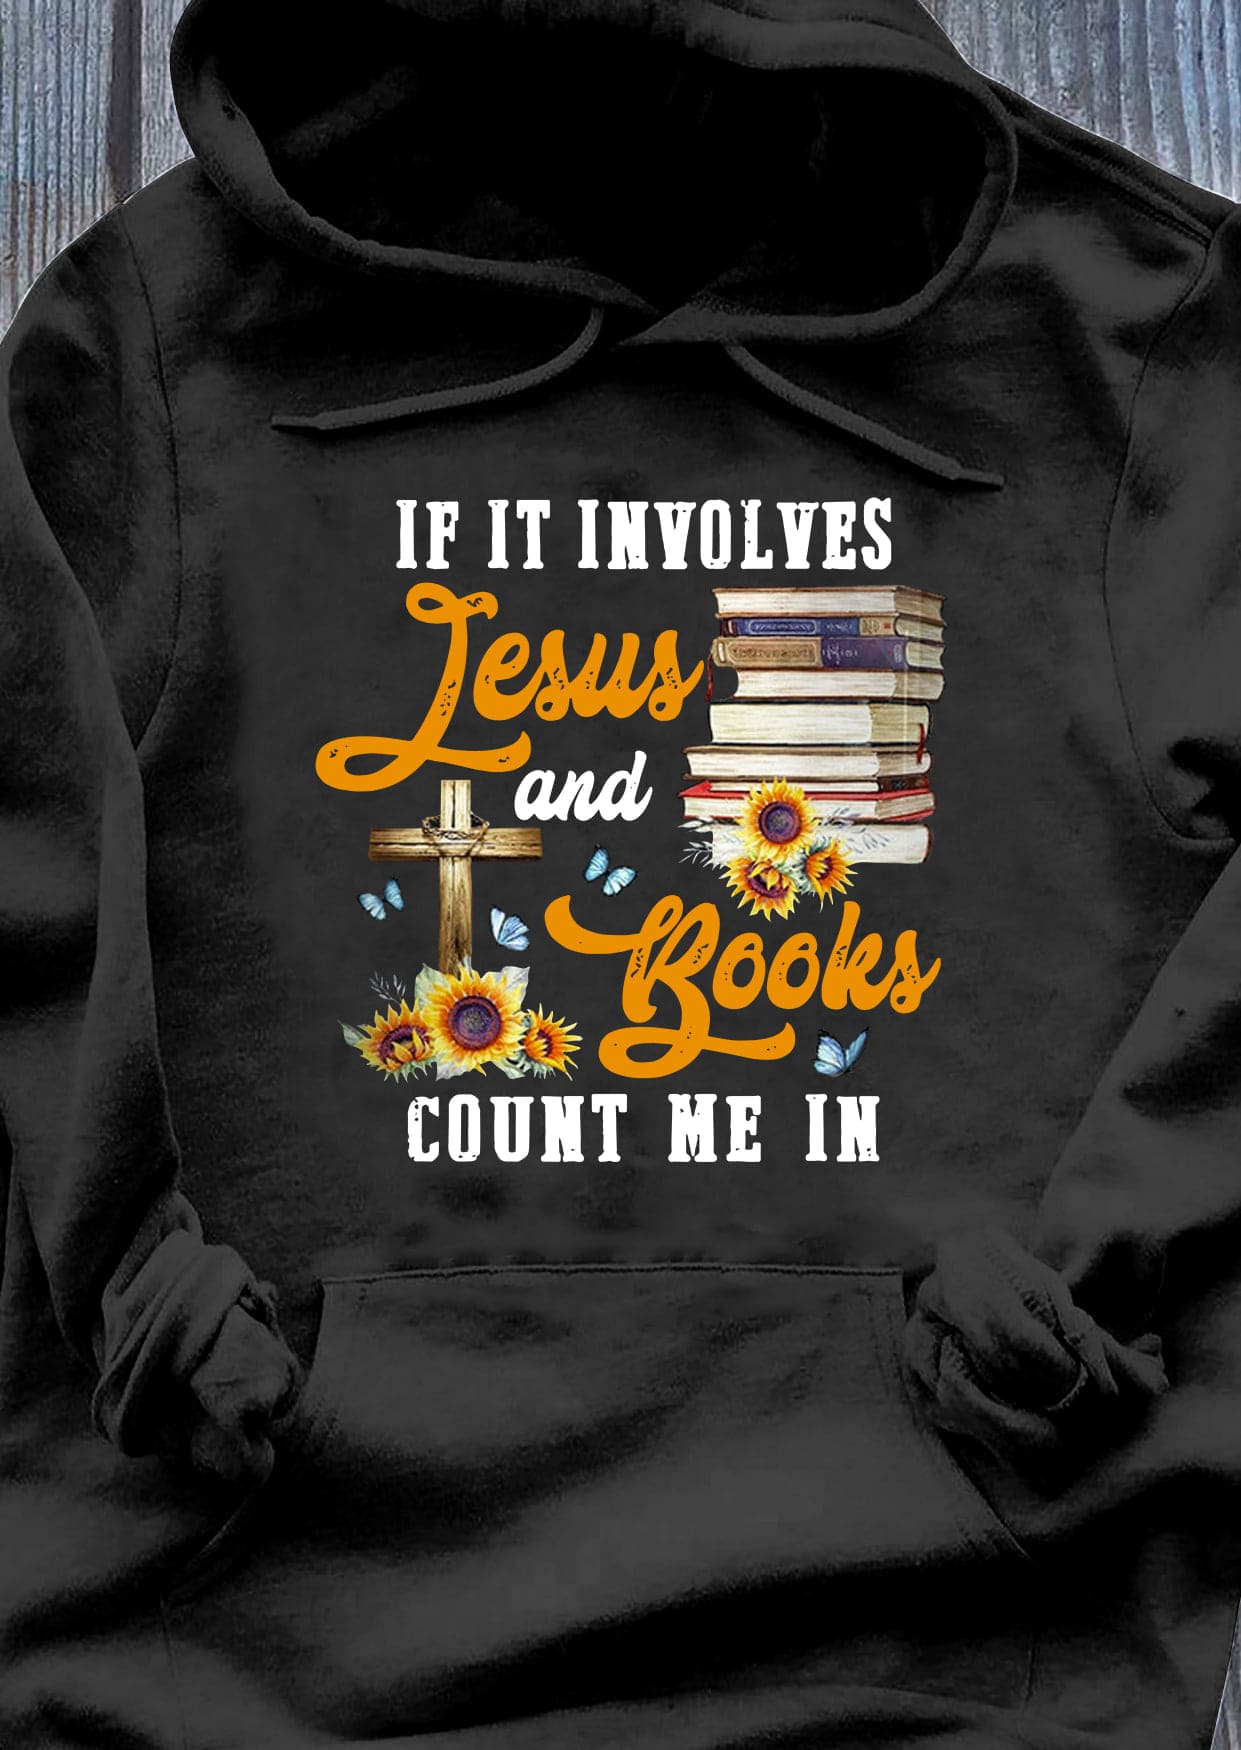 If it involves jesus and books, count me in - Love books and Jesus, Believe in God